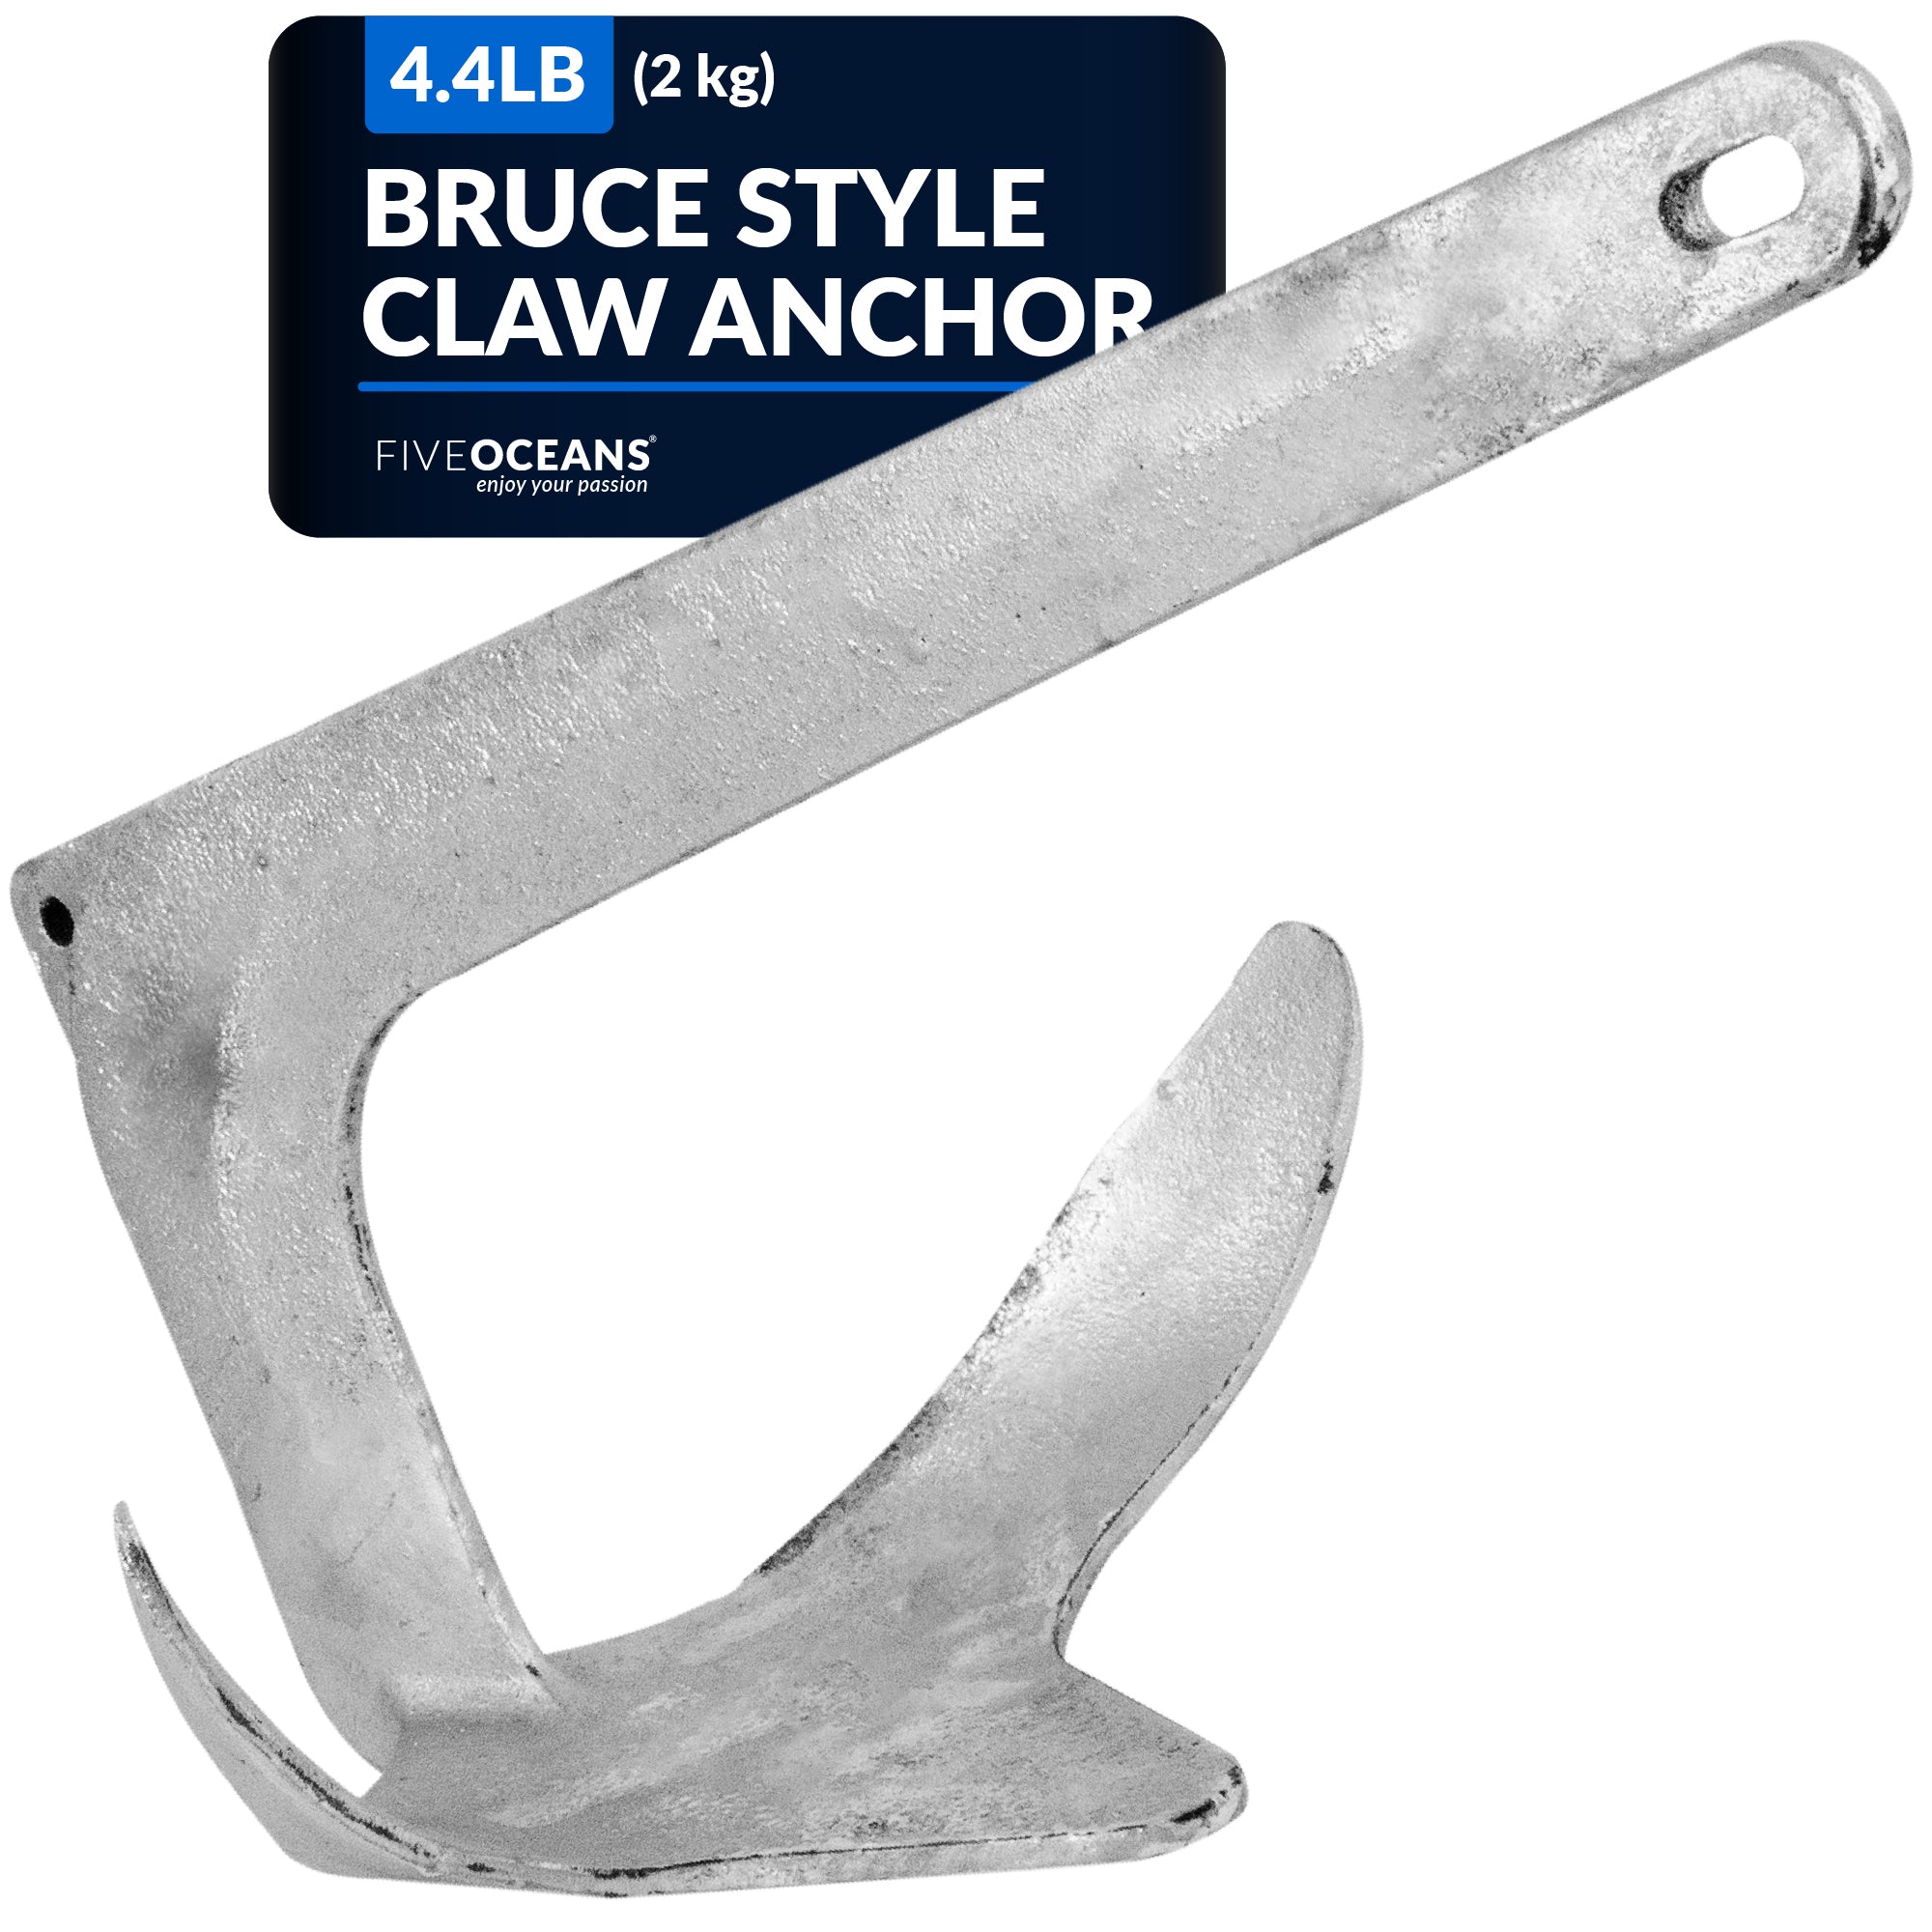 Bruce Style Claw Anchor, 4.4 Lb / 2Kg Hot Dipped Galvanized - FO4551